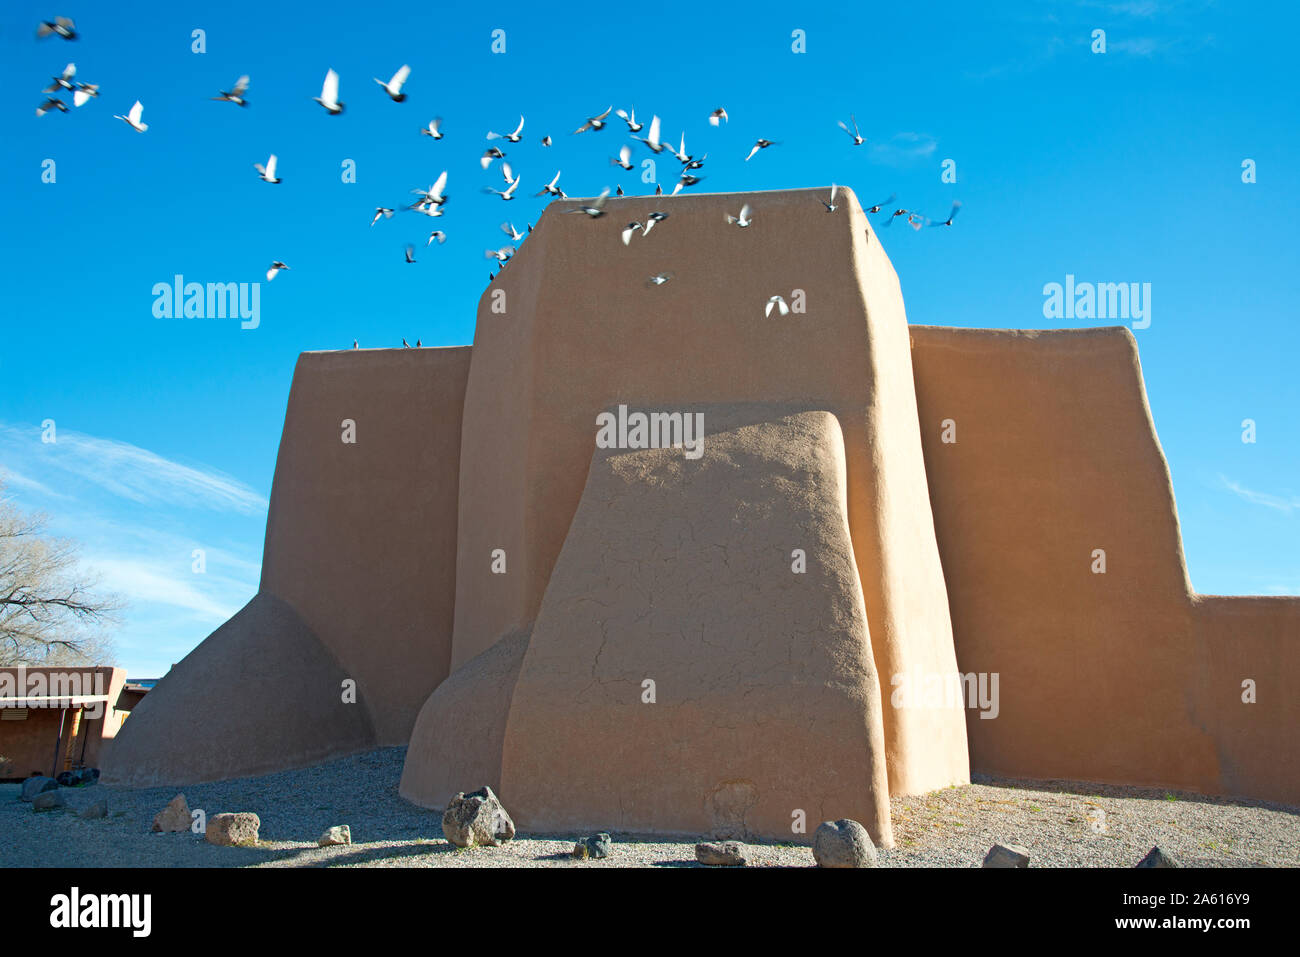 Flock of pigeons flying from the historic adobe San Francisco de Asis church in Taos, New Mexico, United States of America, North America Stock Photo